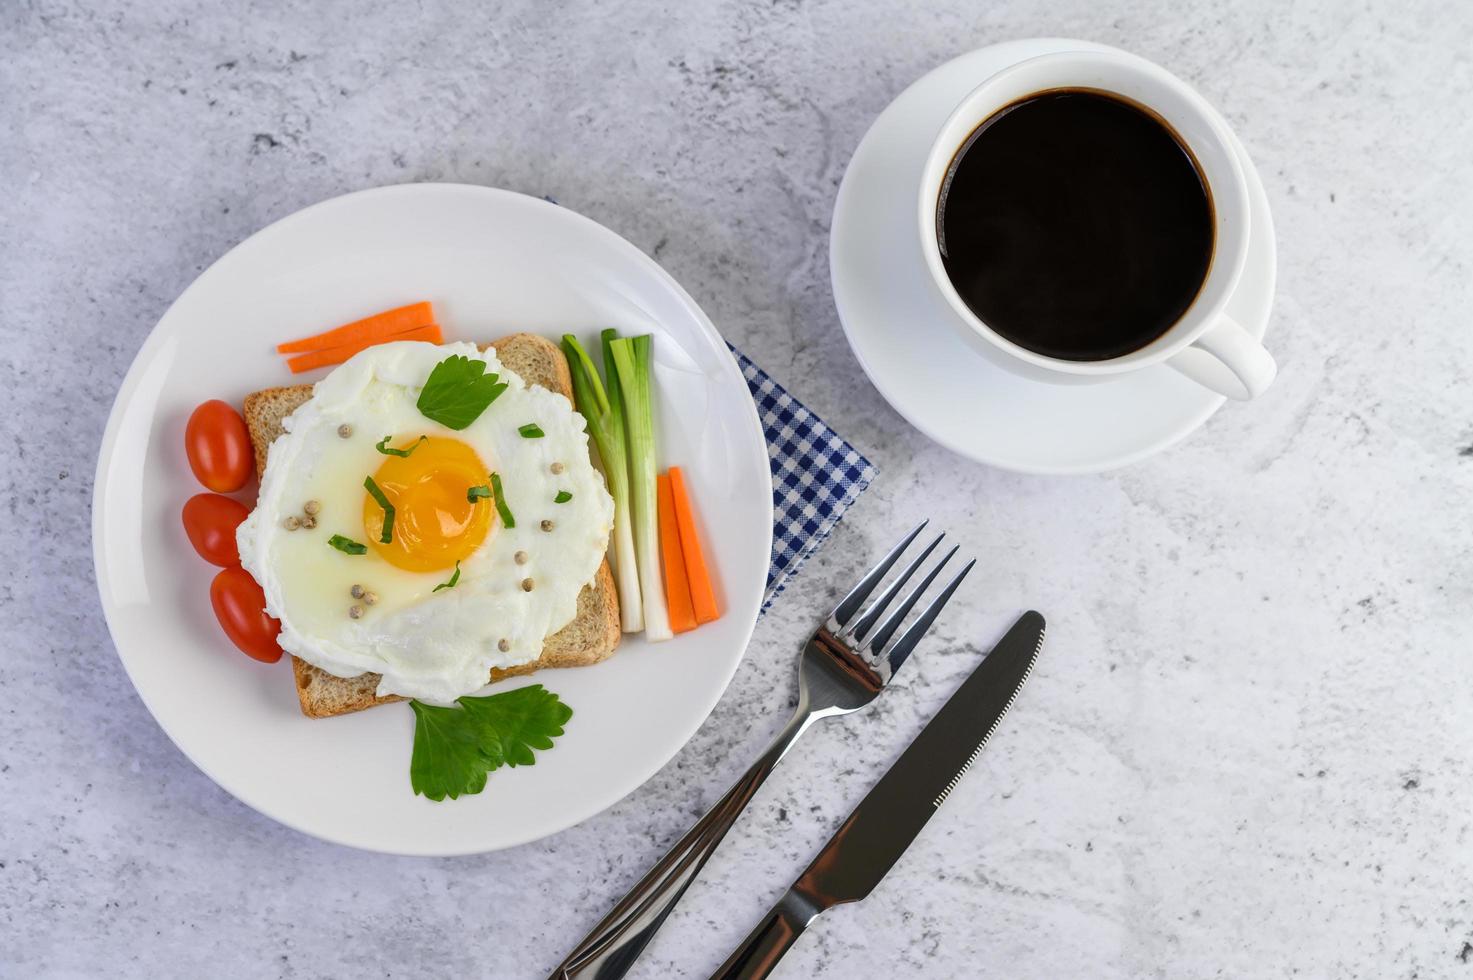 A fried egg on toast topped with pepper seeds with carrots and spring onions photo